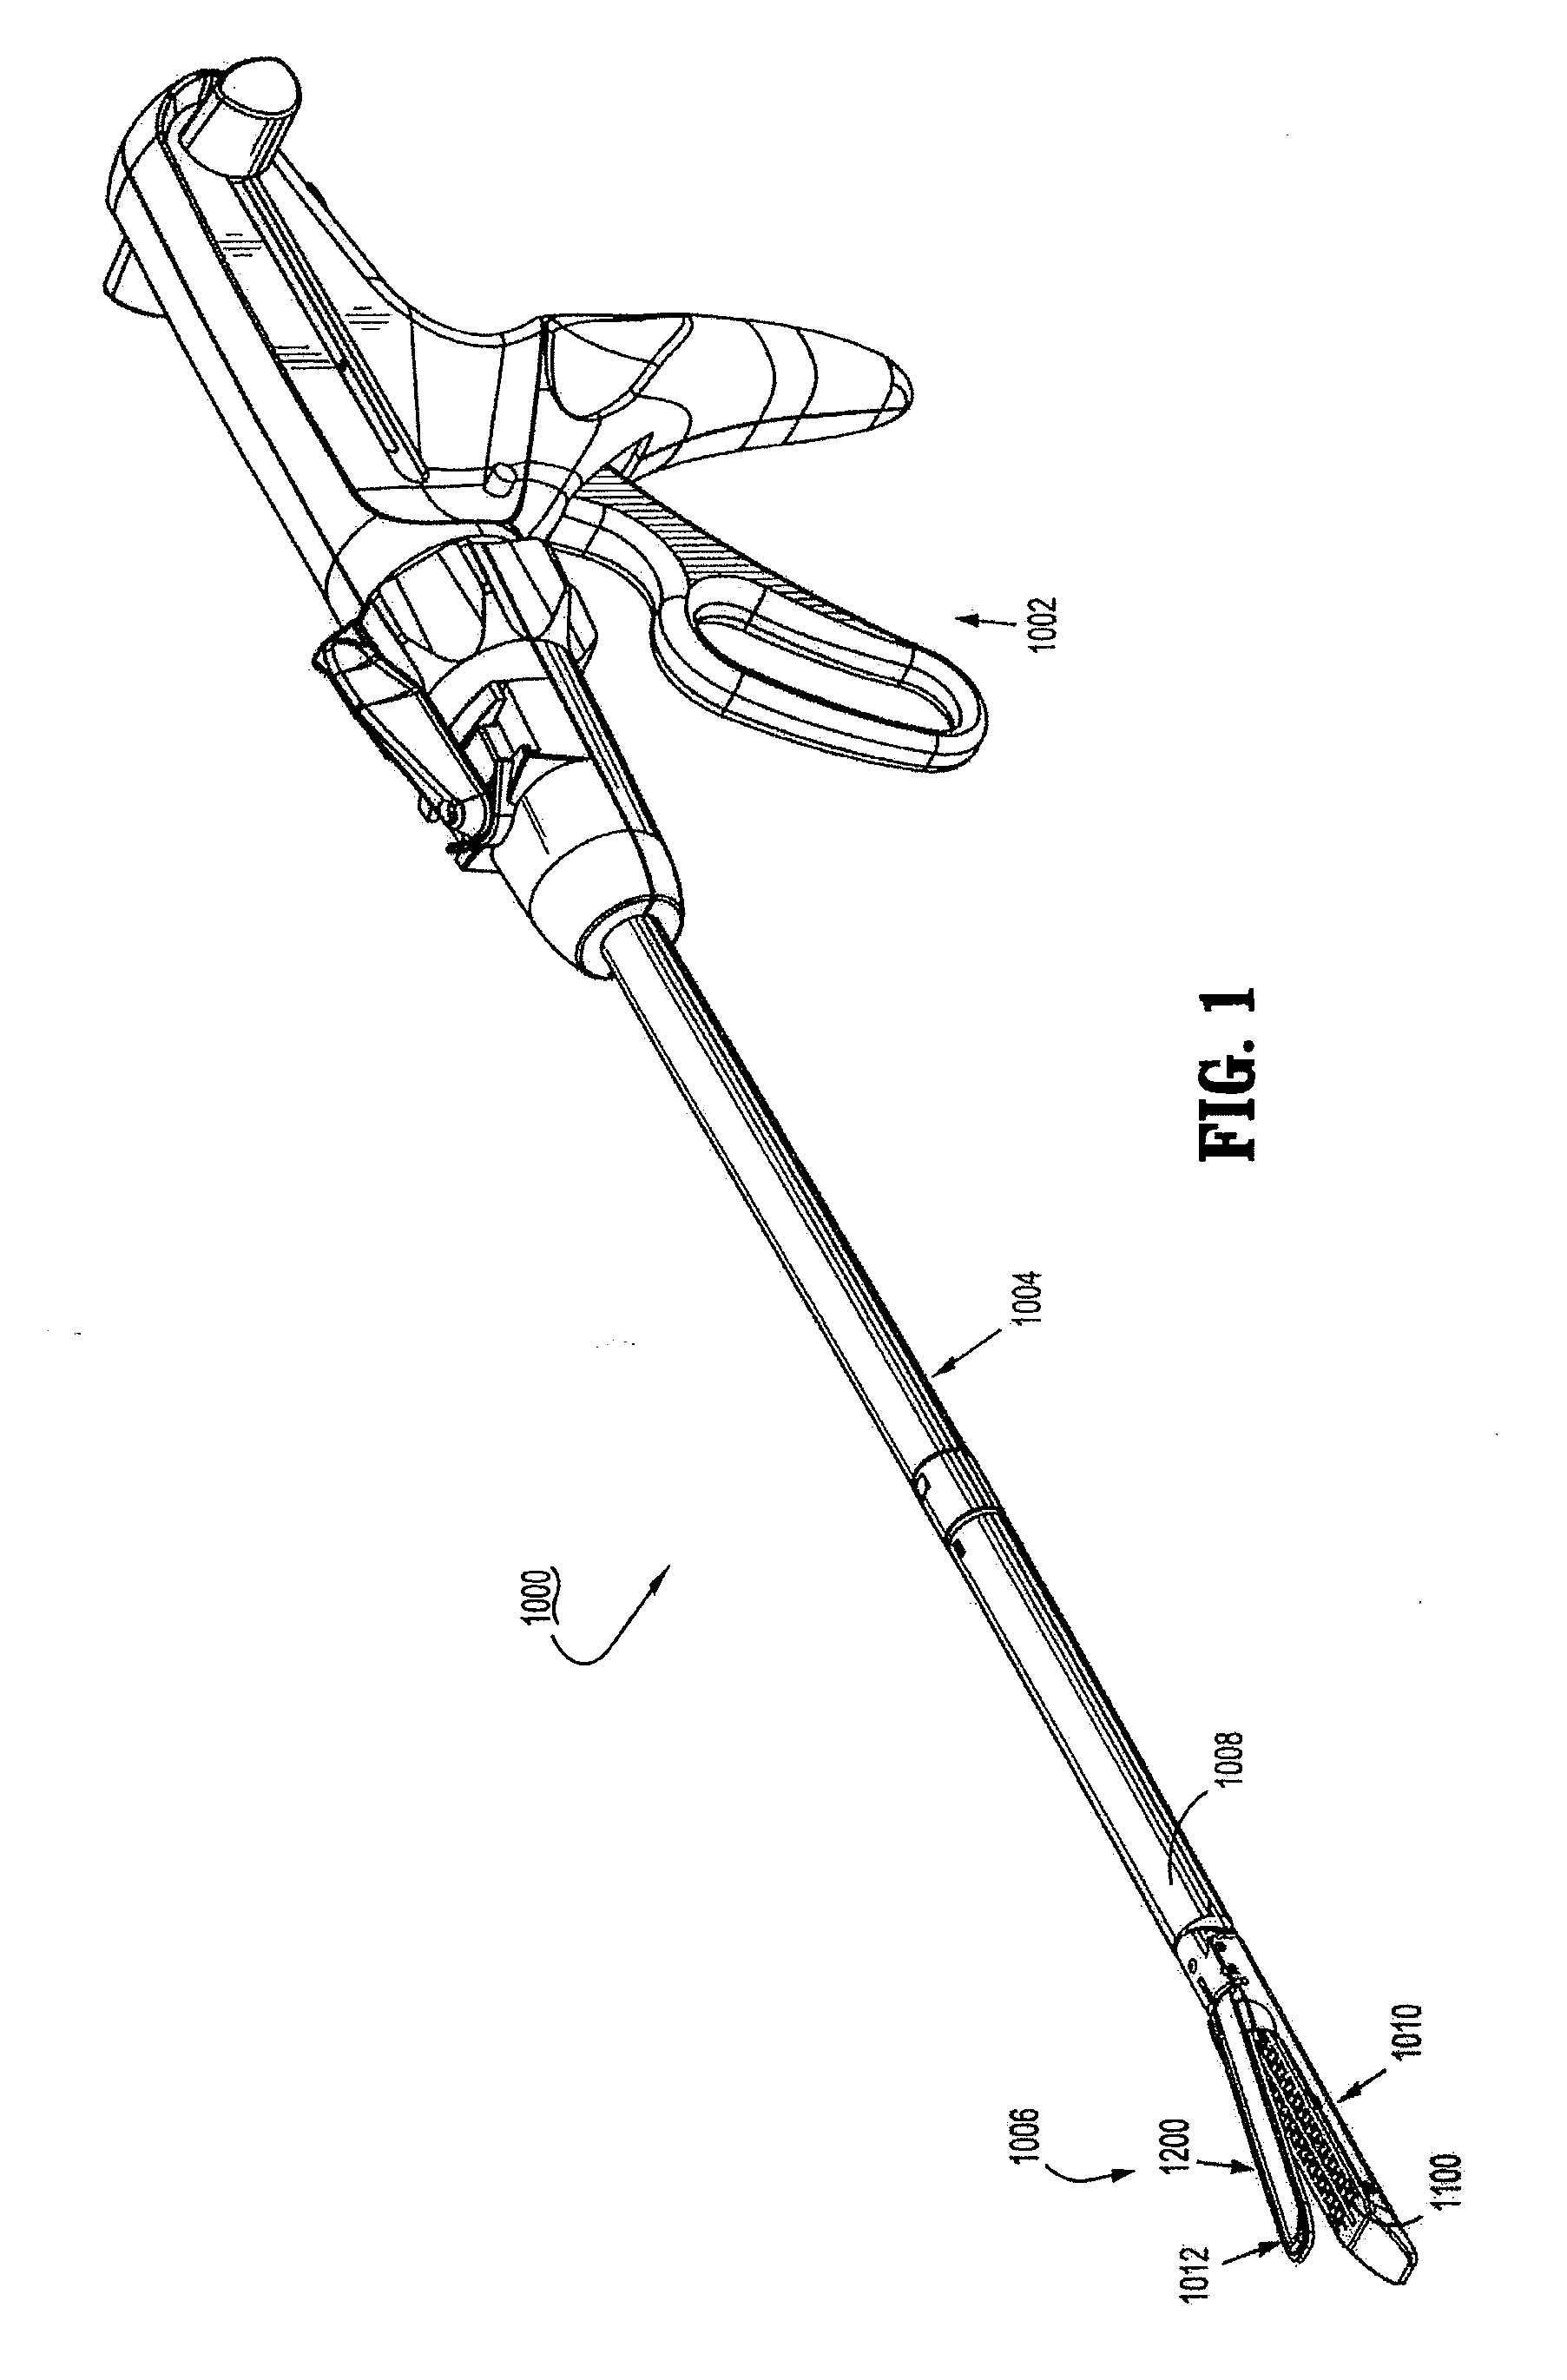 Single loop surgical fastener apparatus for applying variable compression